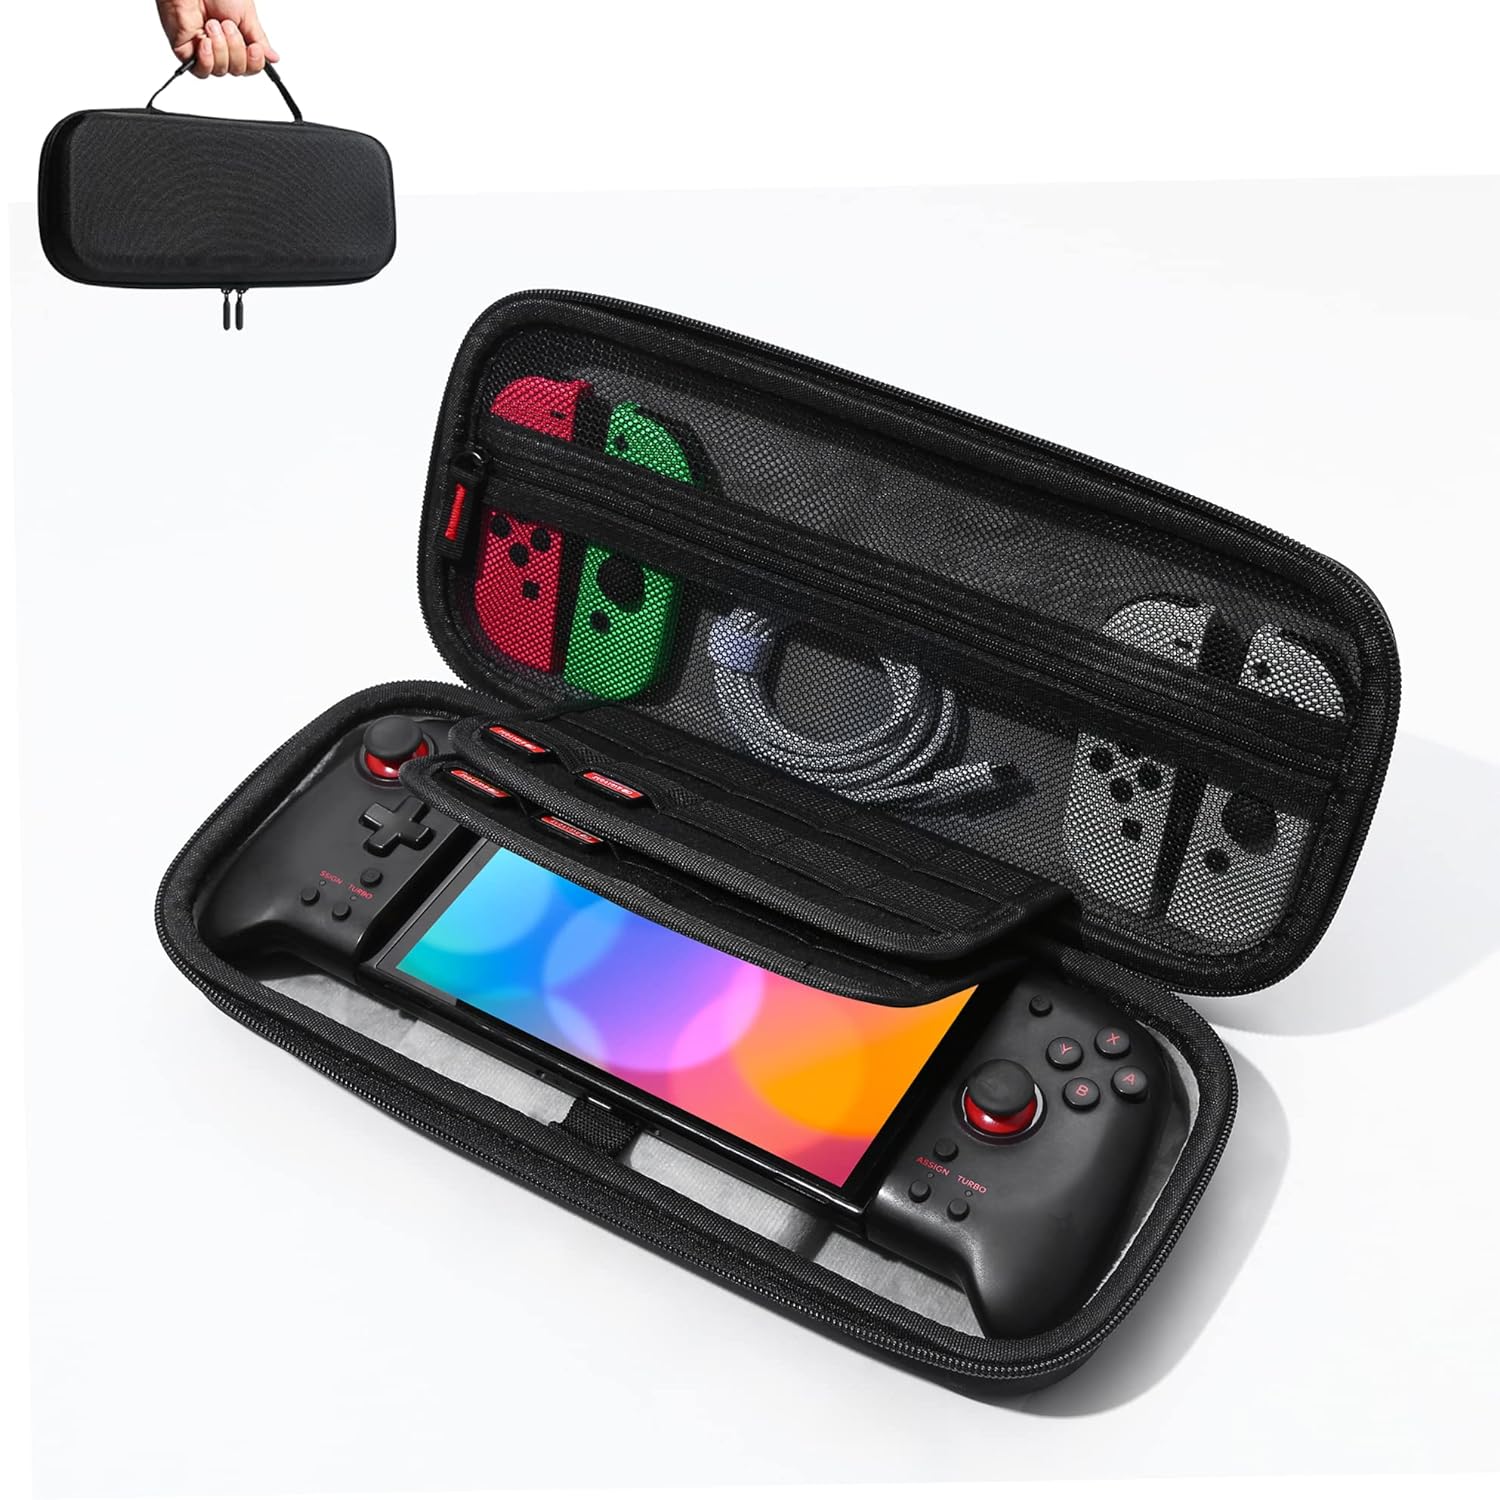 Hori Split Pad Pro Case – ZBRO Hard Shell Case for Nintendo Switch Split Pad Pro Controller -Button Protection / Large Capacity / Support 20 Game Slots